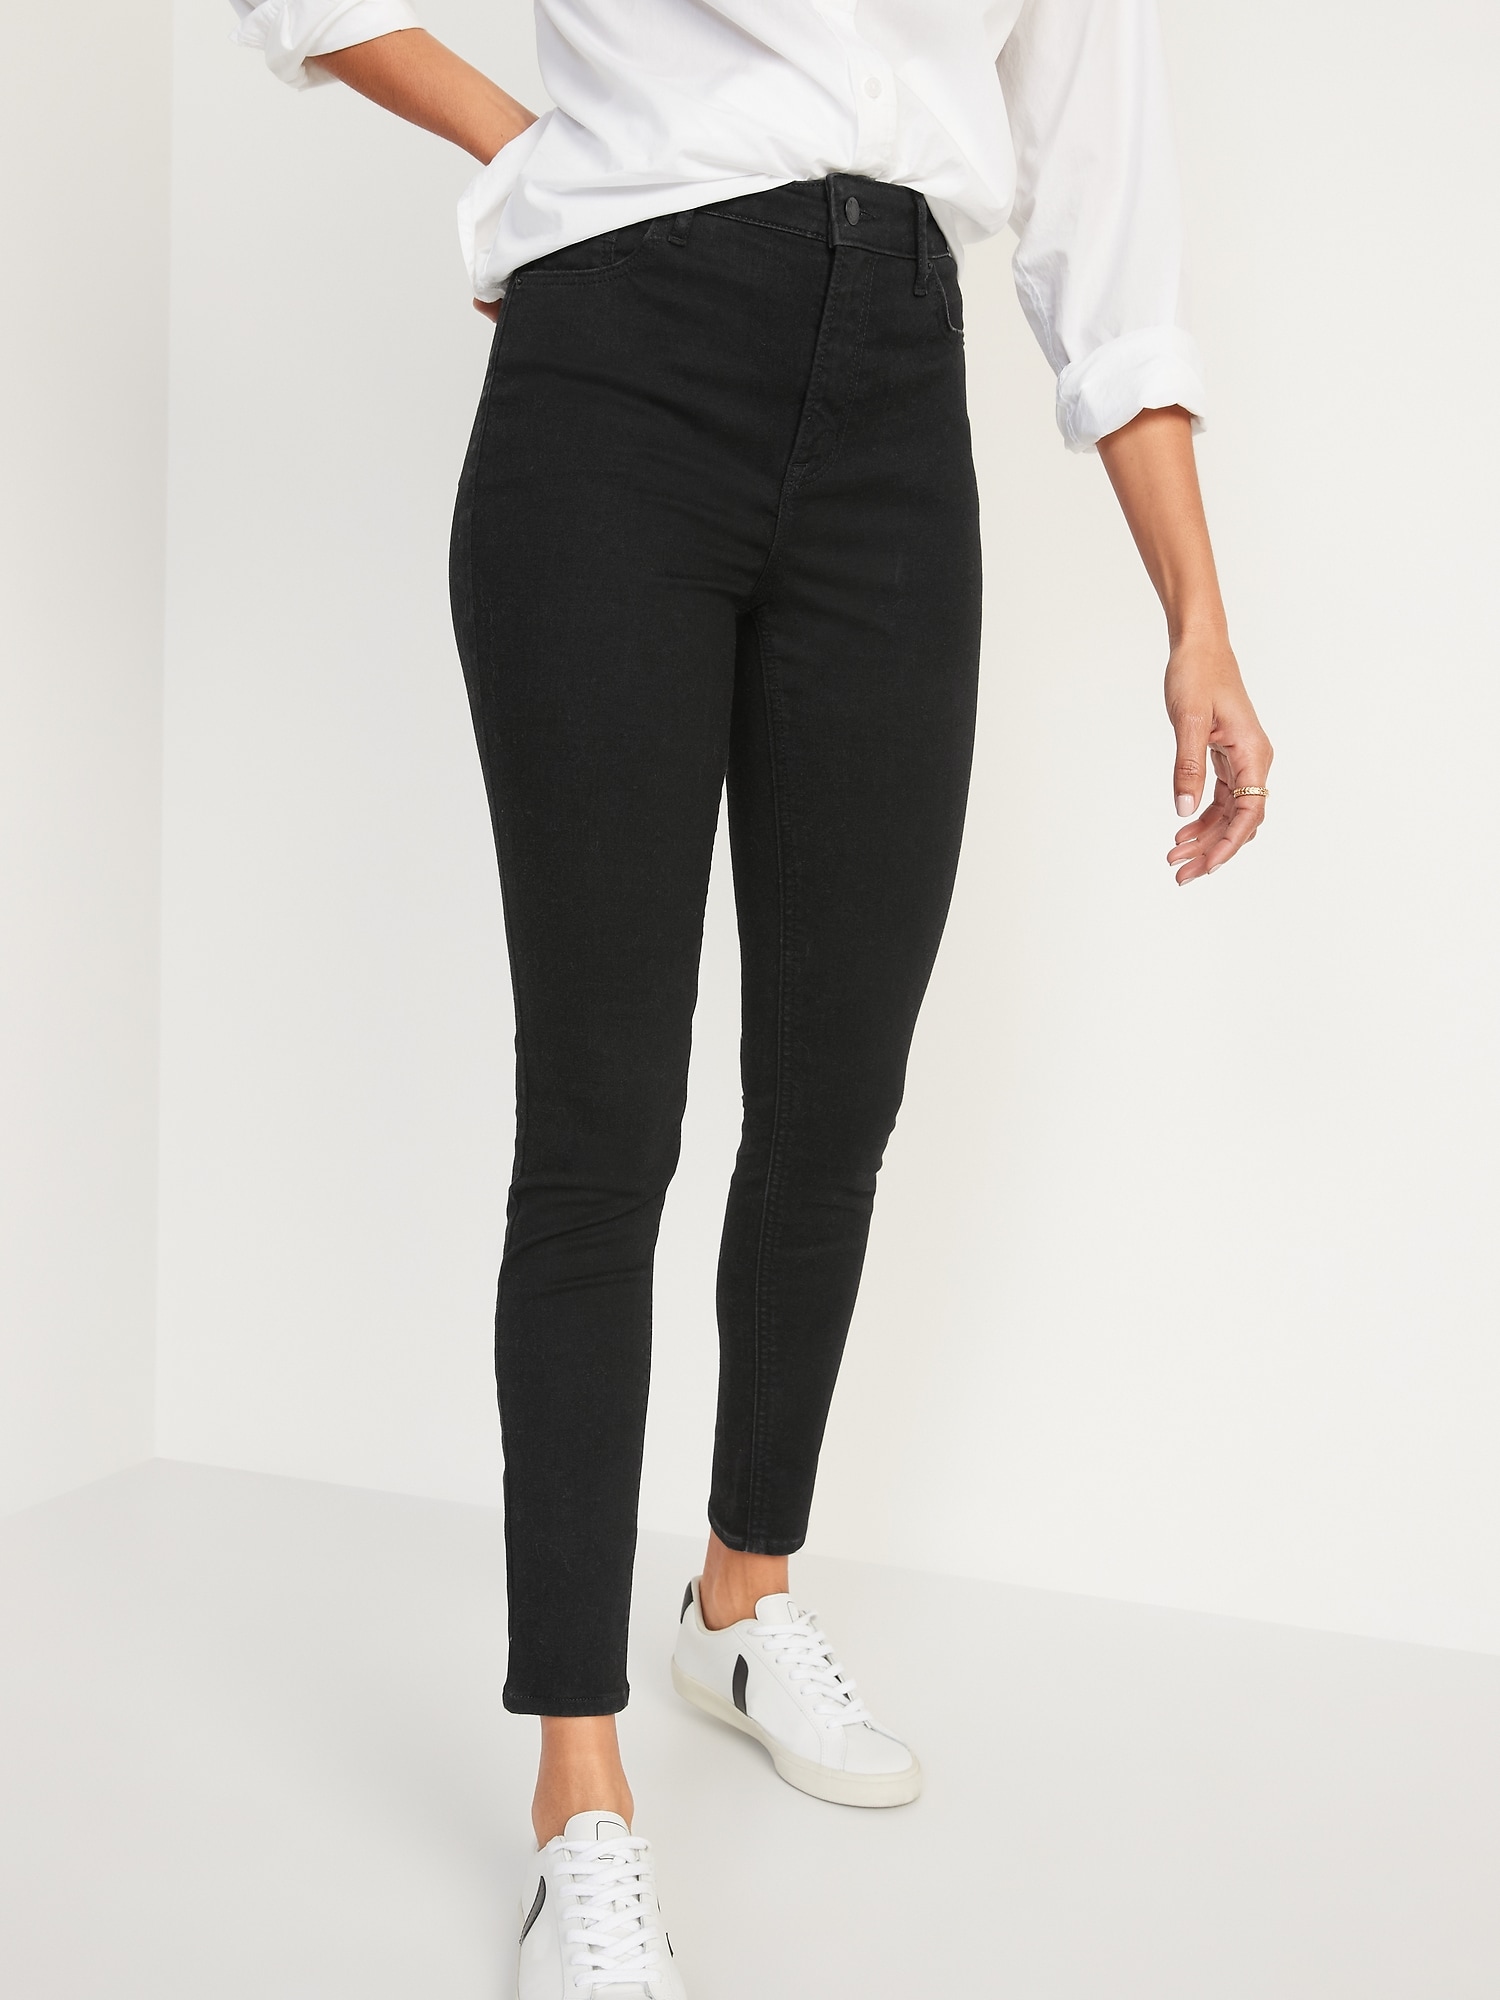 Old Navy FitsYou 3-Sizes-in-1 Extra High-Waisted Rockstar Super-Skinny Black Jeans for Women black. 1